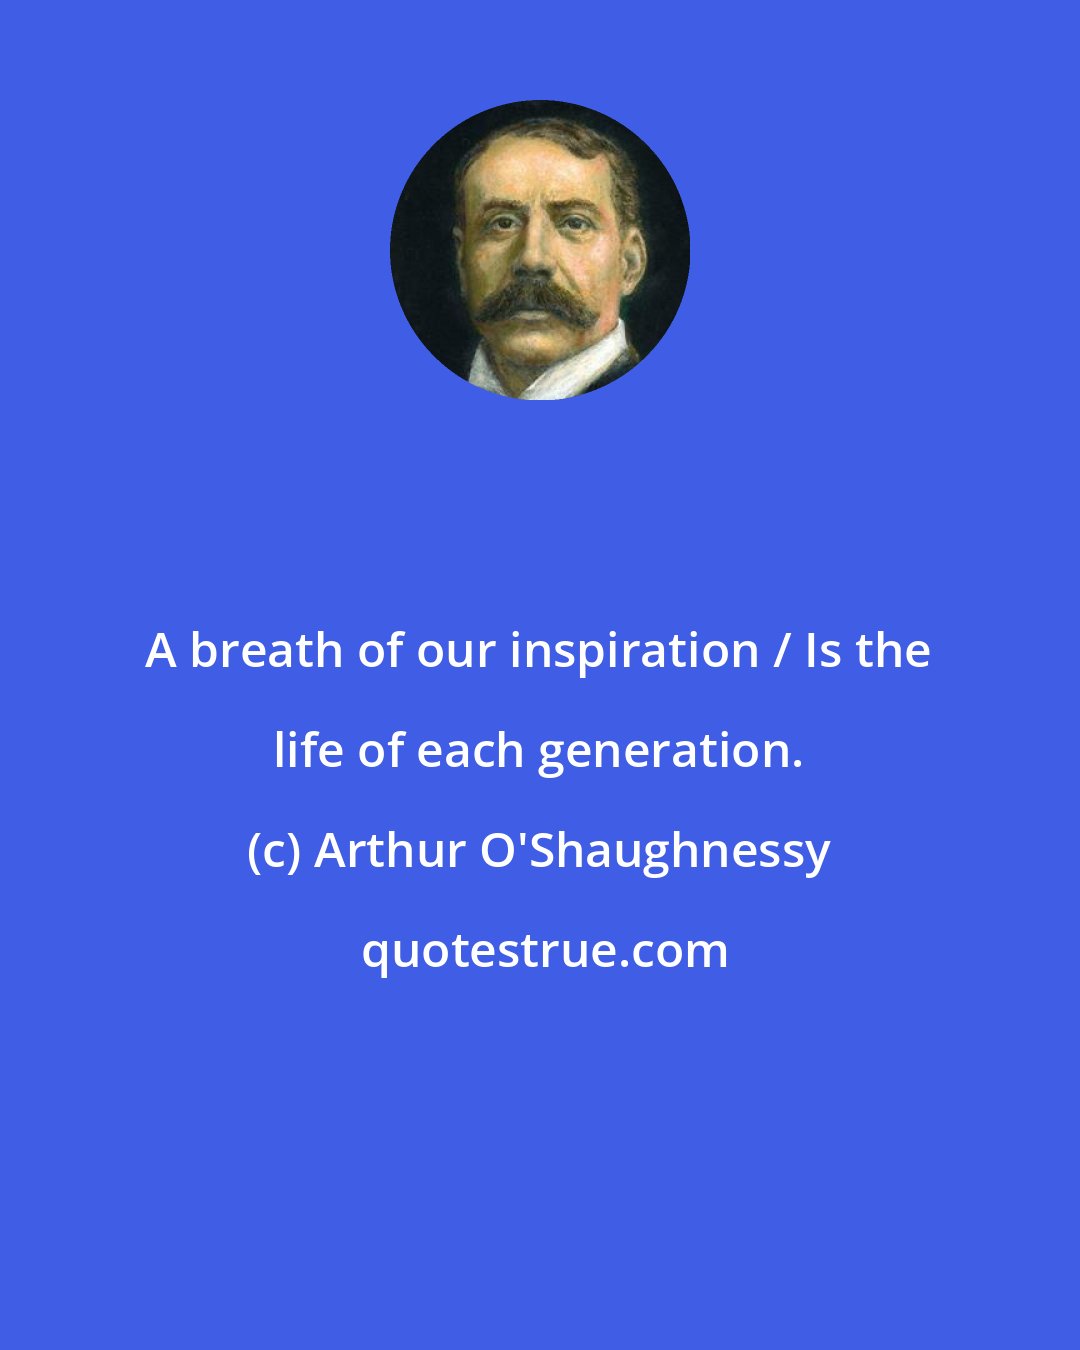 Arthur O'Shaughnessy: A breath of our inspiration / Is the life of each generation.